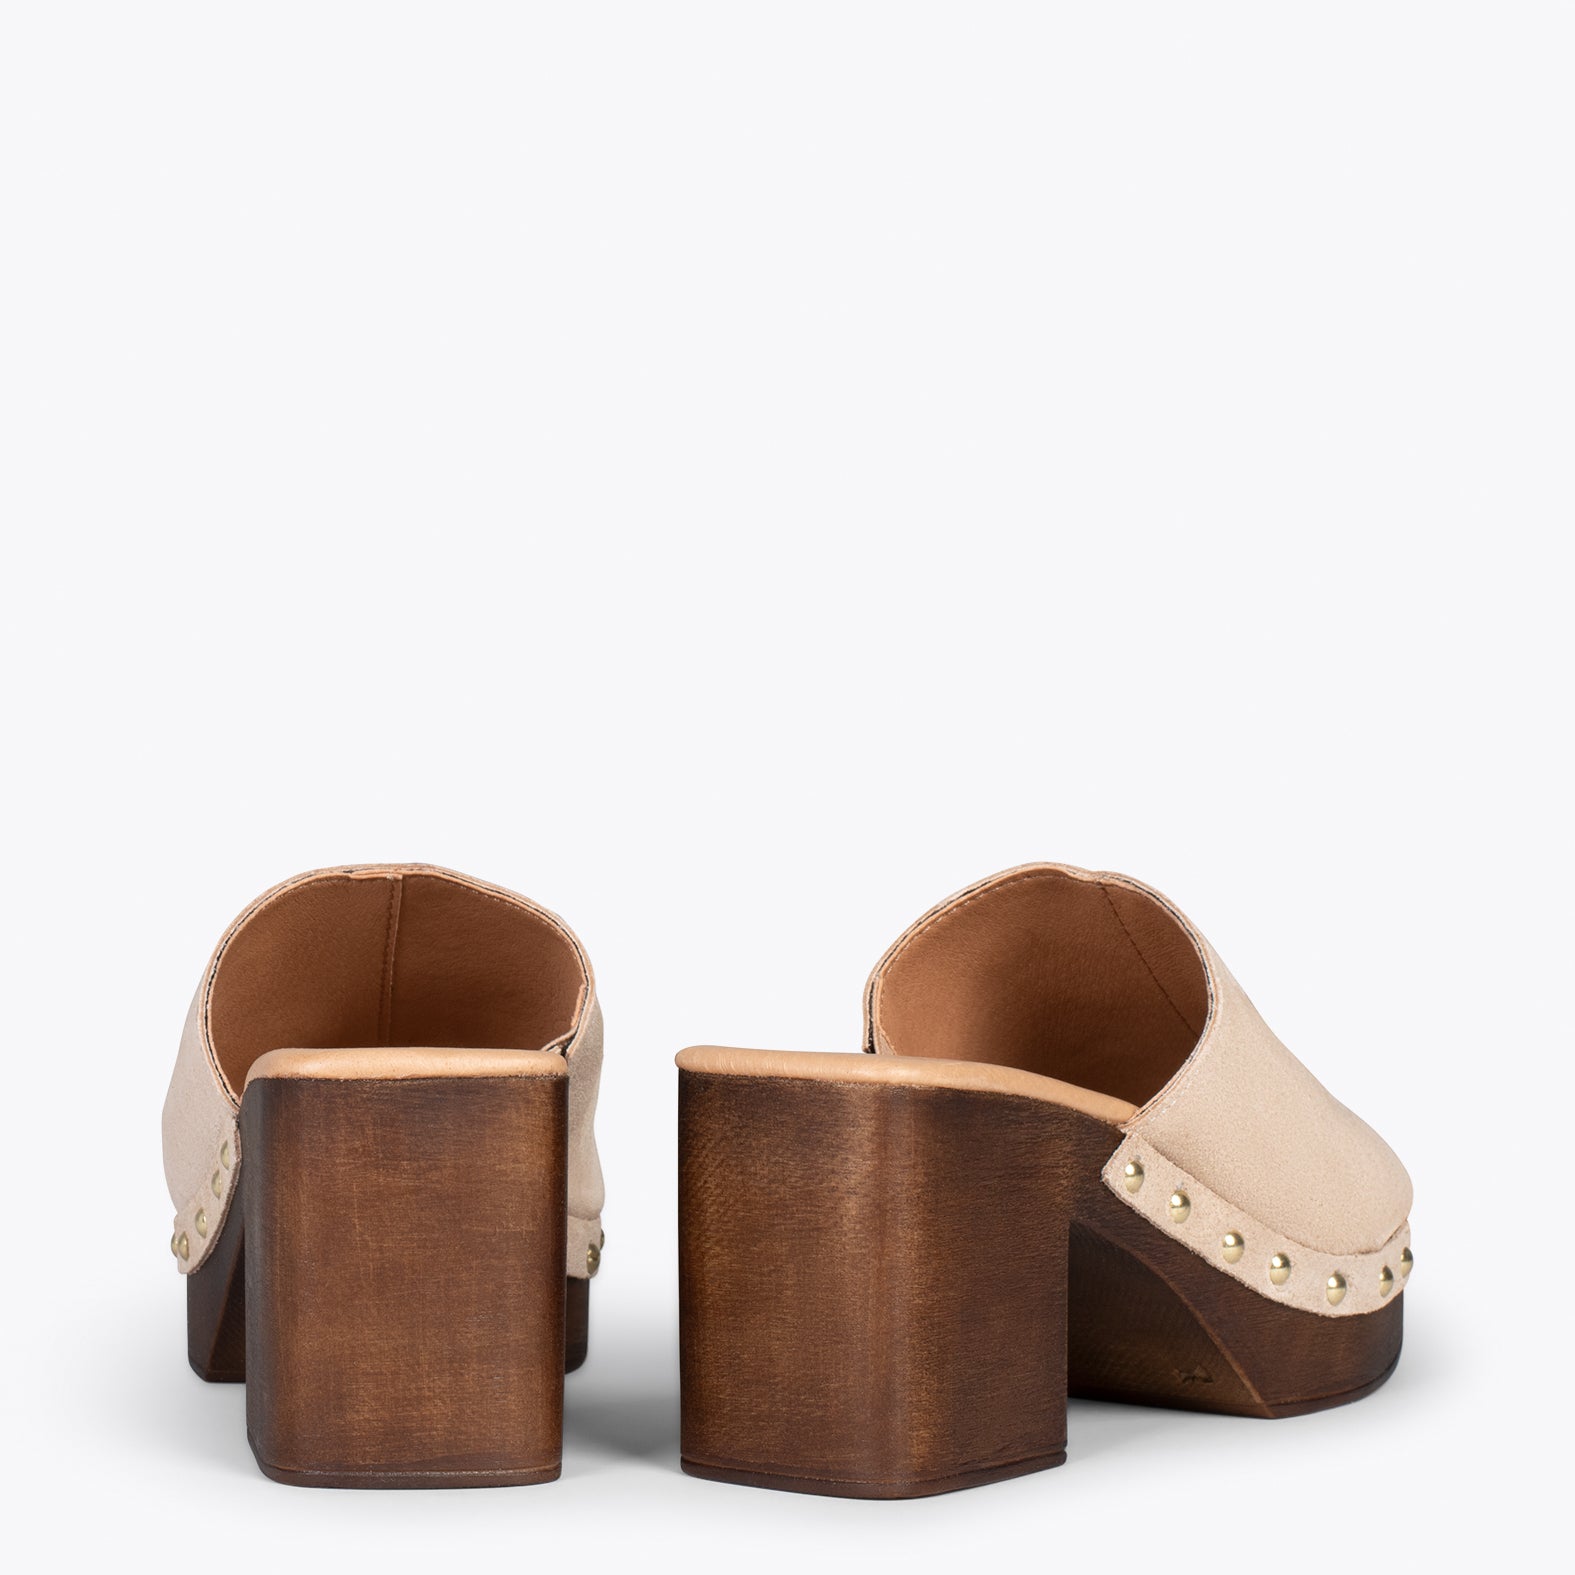 HOLIDAY – BEIGE mules with heel and platform